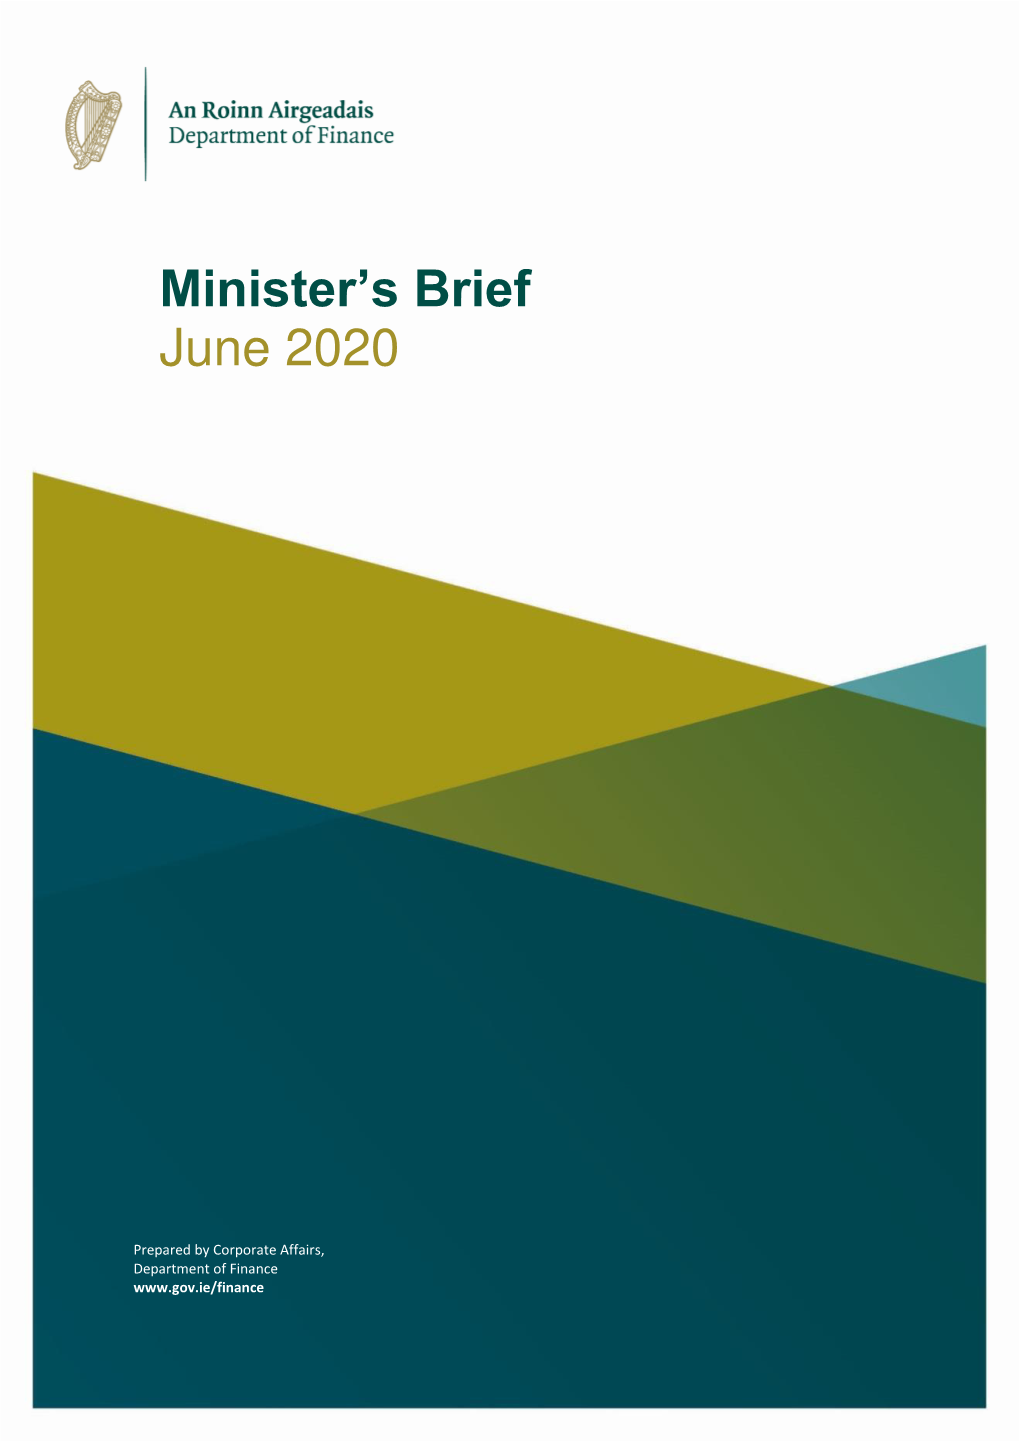 Minister's Brief June 2020